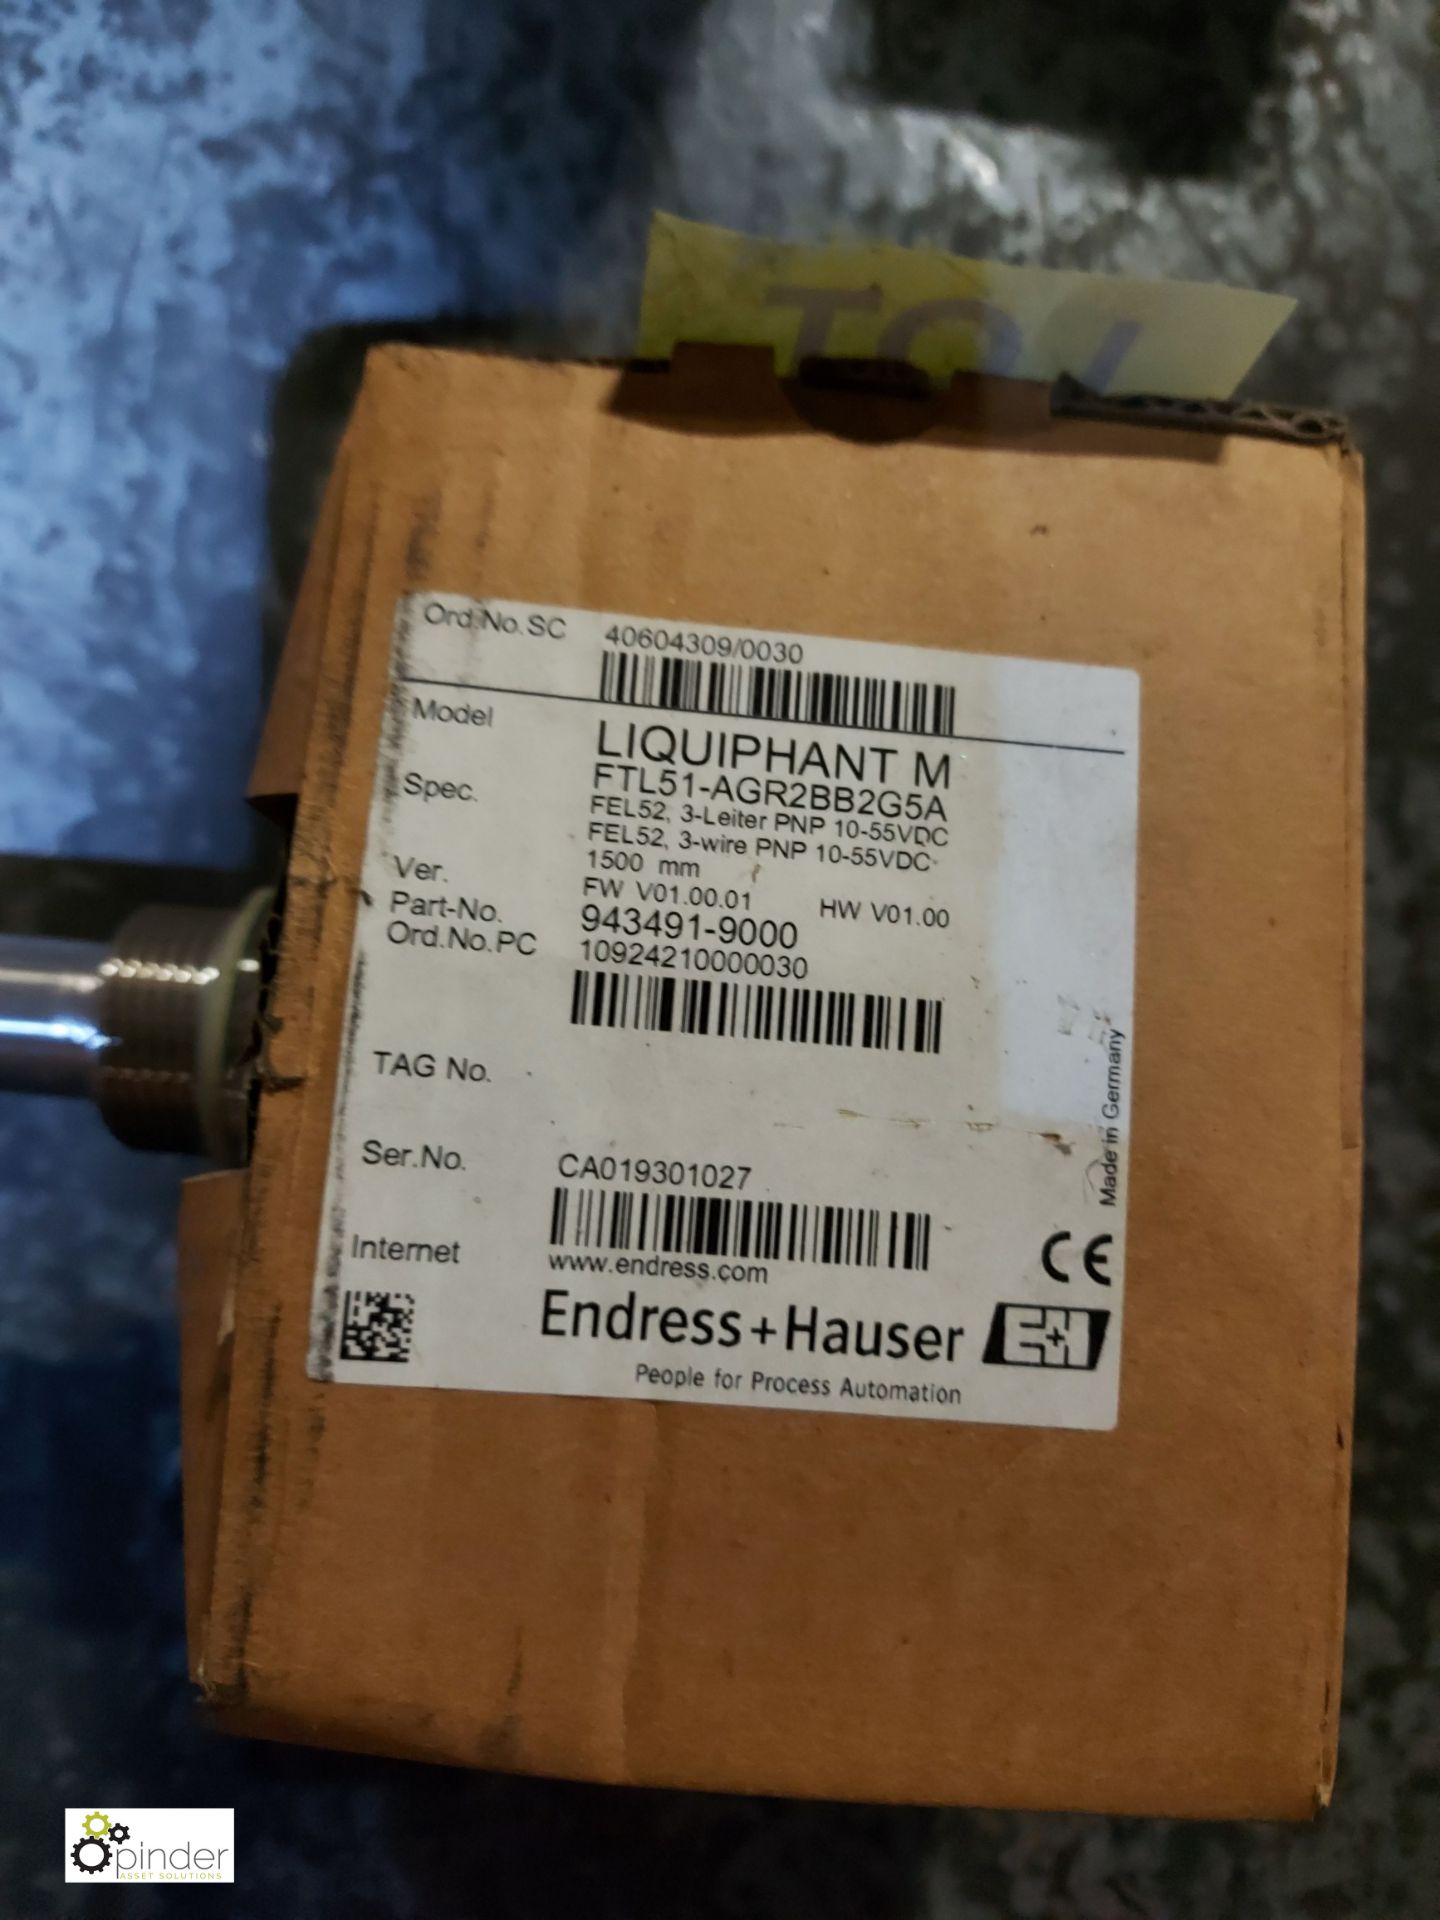 Endress & Hauser FTL51-AGR2BB2G5A Liquid Level Switch, 1500mm long, BSP end, unused (please note - Image 3 of 3